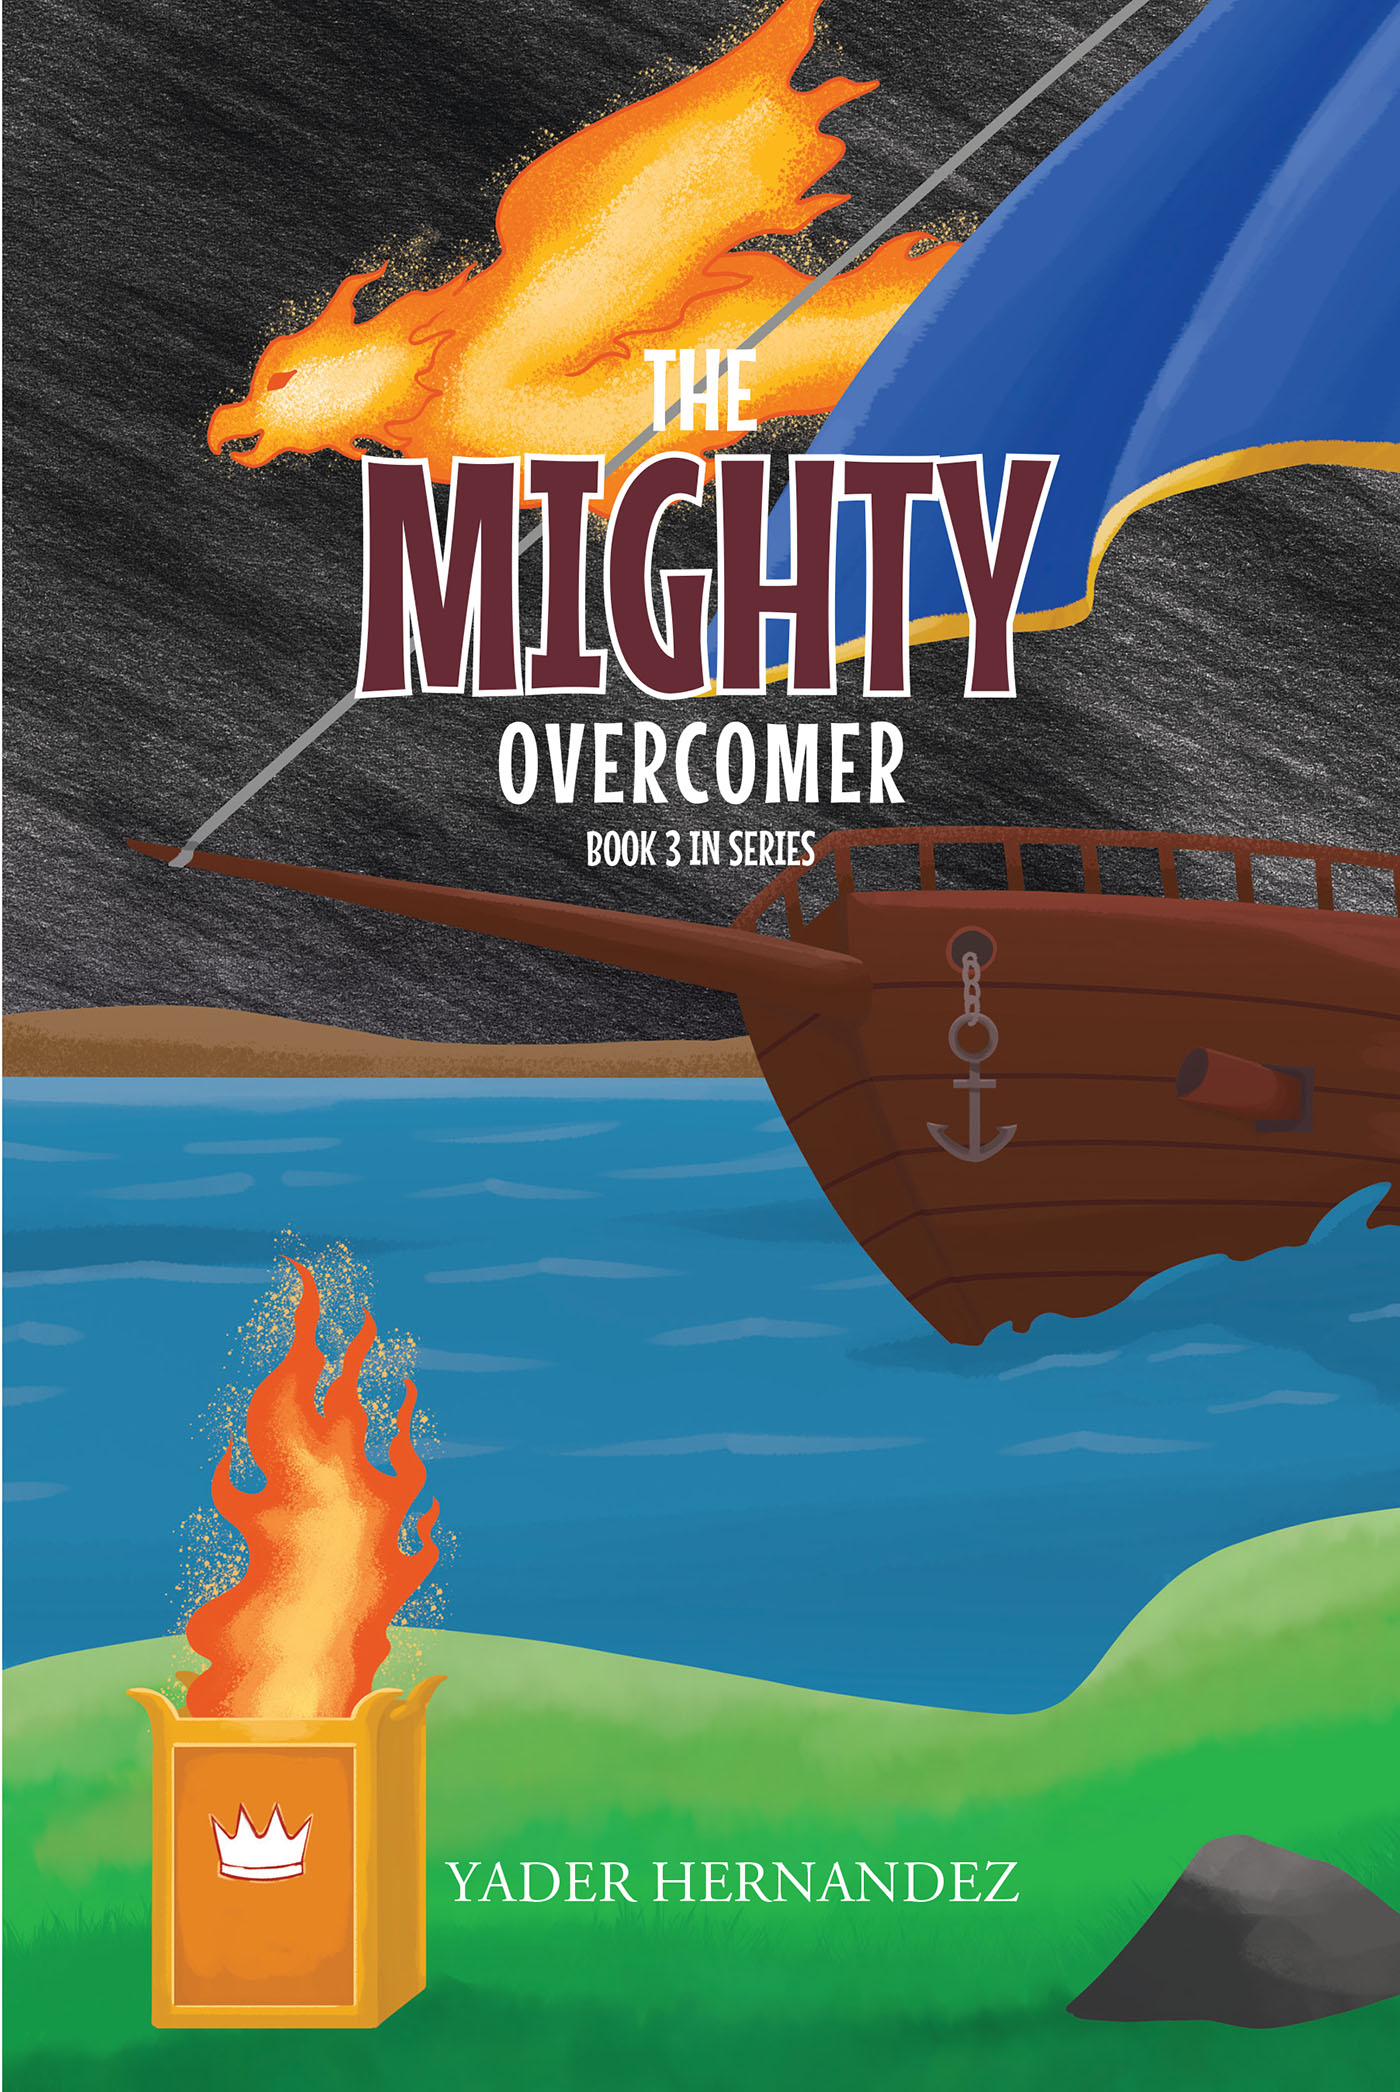 Author Yader Hernandez’s New Book, "The Mighty: Overcomer," is a Fascinating and Engaging Novel Written to Bring All Readers Closer to God